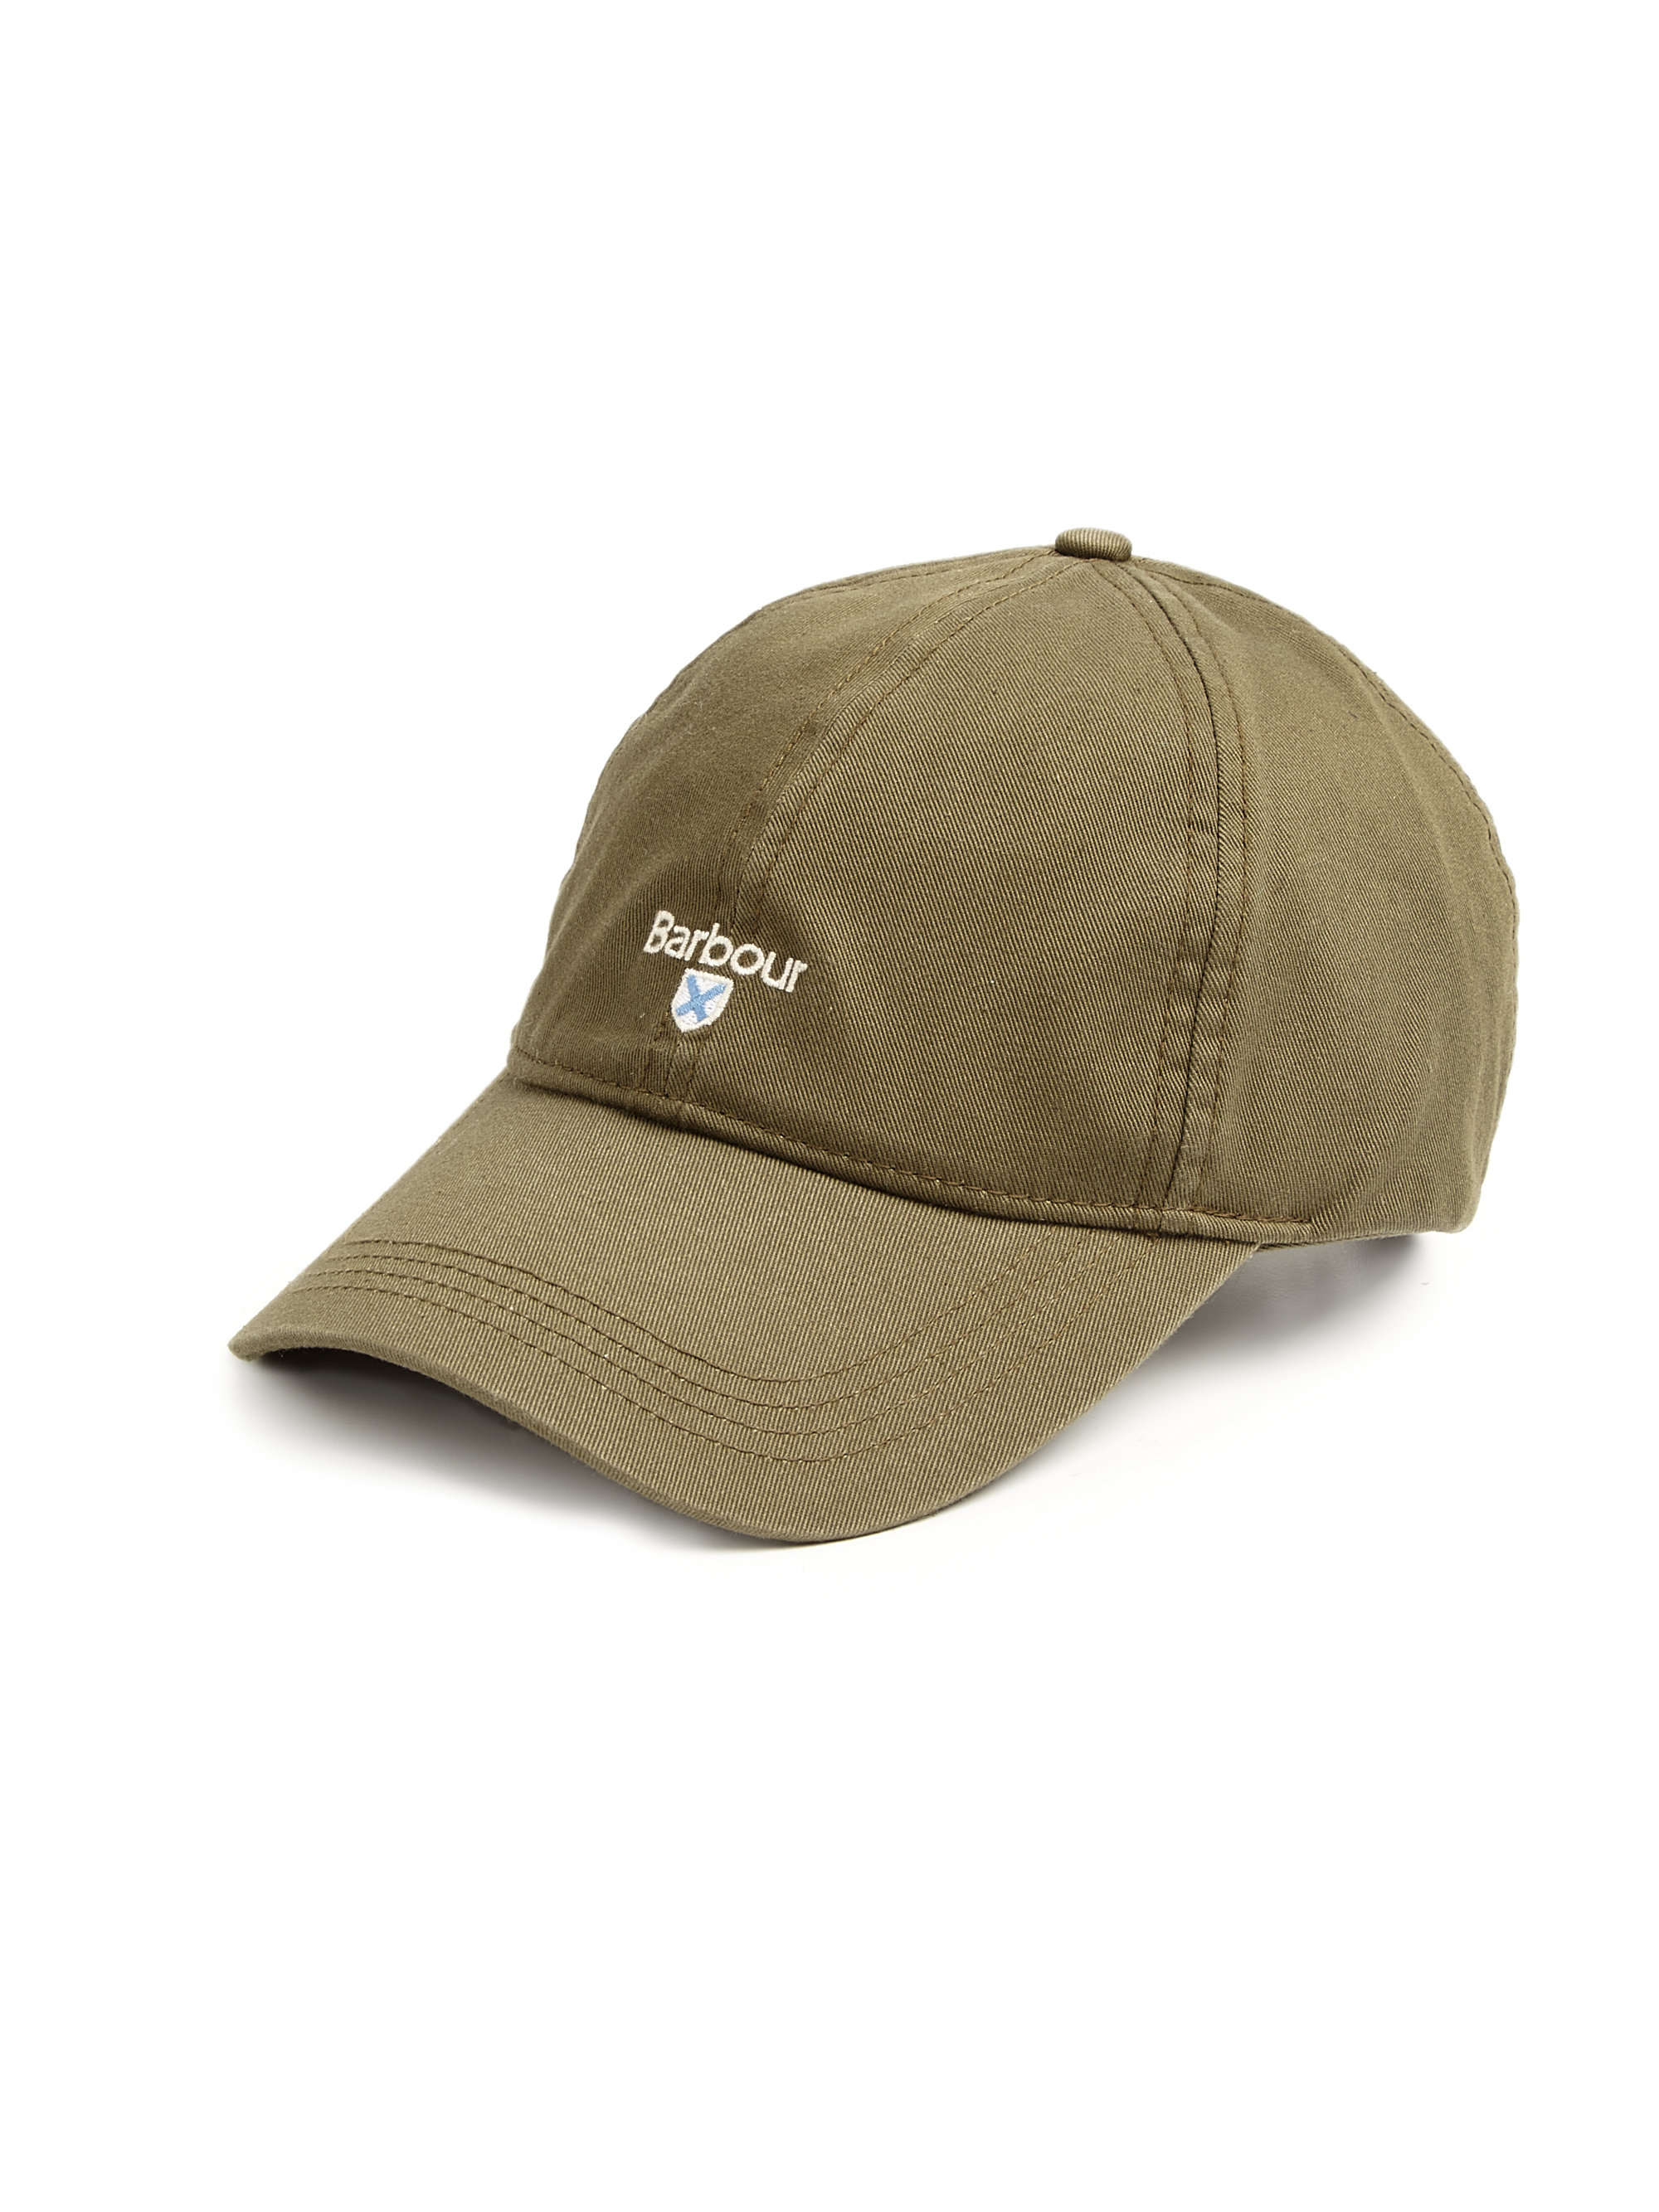 Barbour Cotton Men's Cascade Sports Cap in Olive (Green) for Men - Lyst